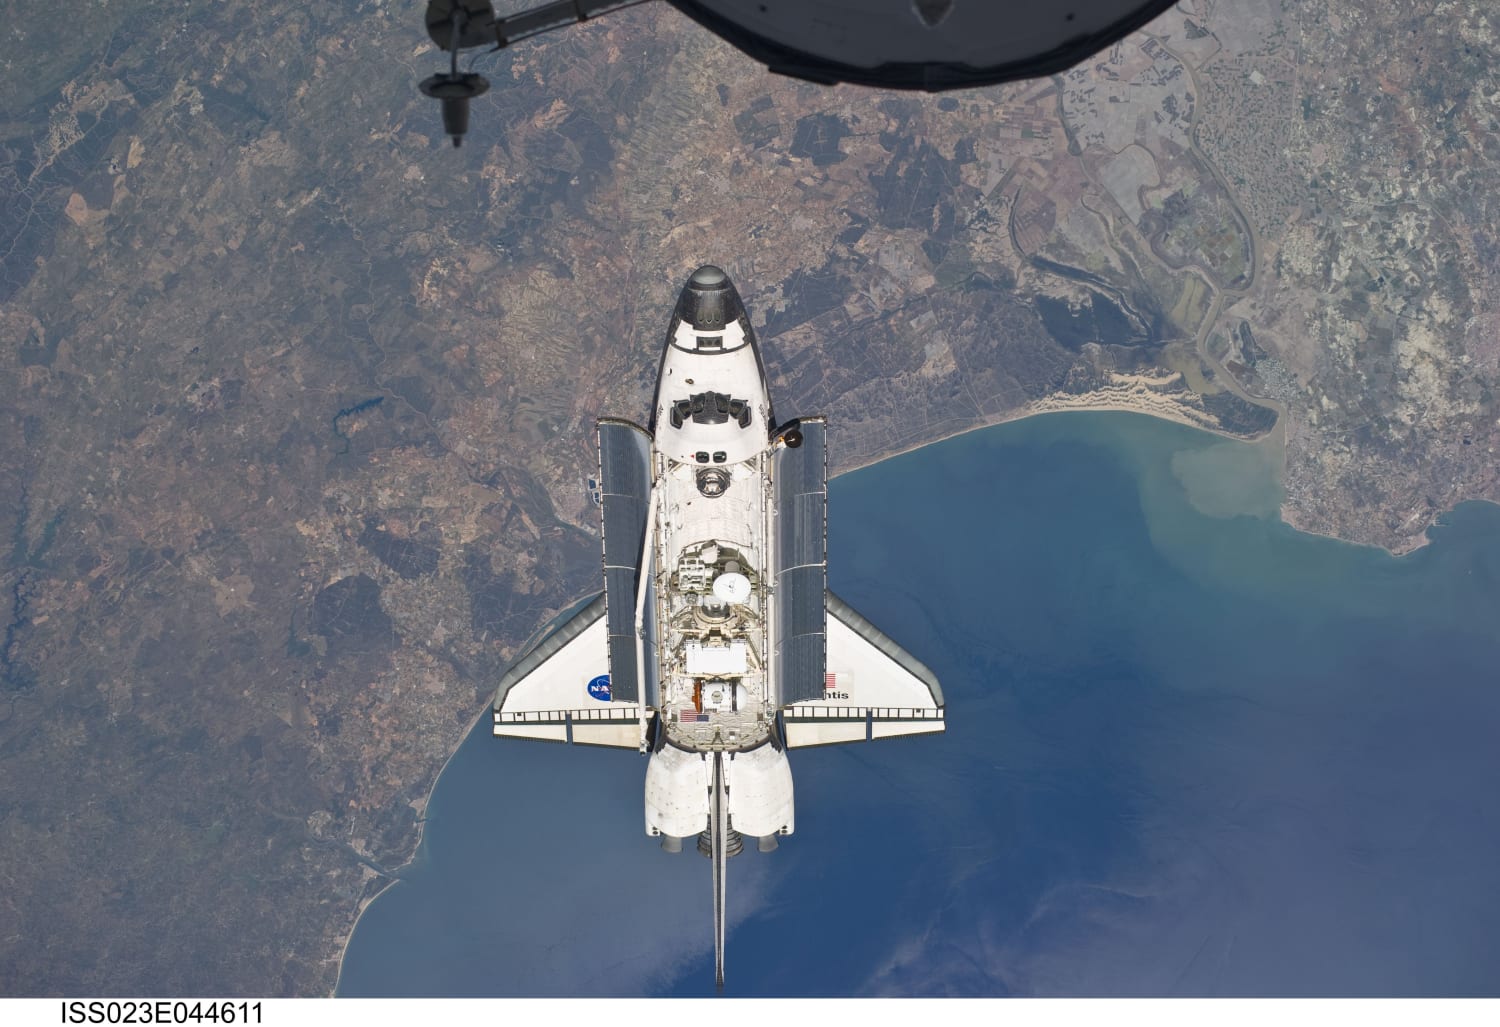 NASA's Space Shuttle Atlantis (STS-132) photographed "above the Atlantic coast of Spain and the Gulf of Cadiz" on 16 May 2010. "The coast includes the city of Ayamonte (left of image as photographed), past Huelva (under Atlantis), past the sand dunes, the Rio Guadalquivir, to the city of Rota."